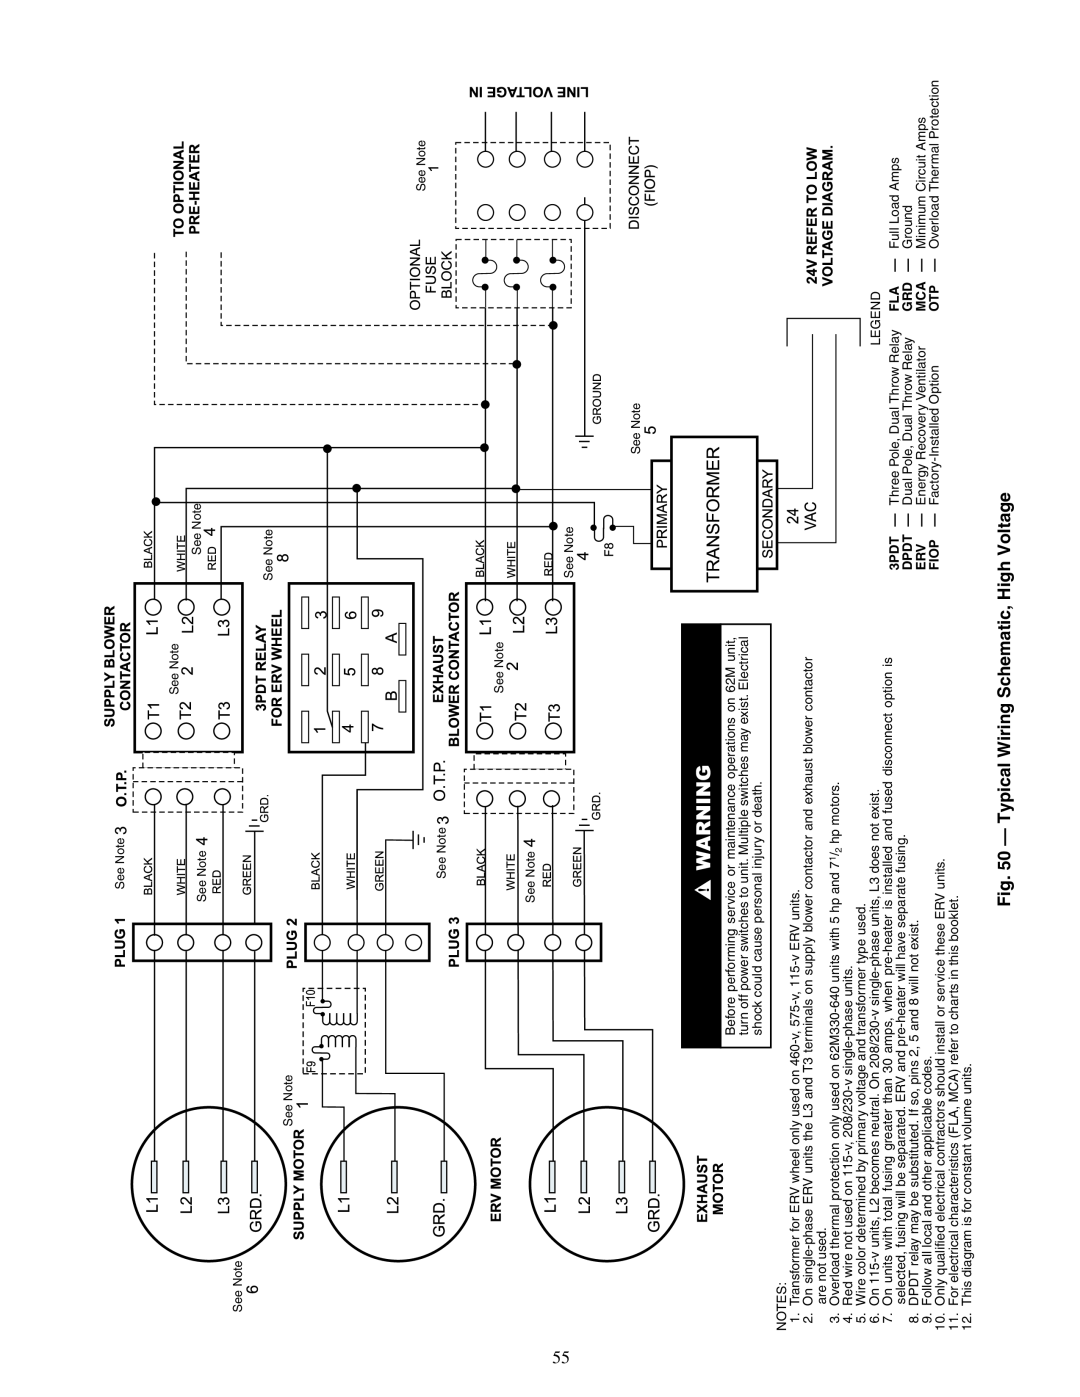 Carrier 62MB, 62ME, 62MC, 62MD specifications Typical Wiring Schematic, High Voltage 